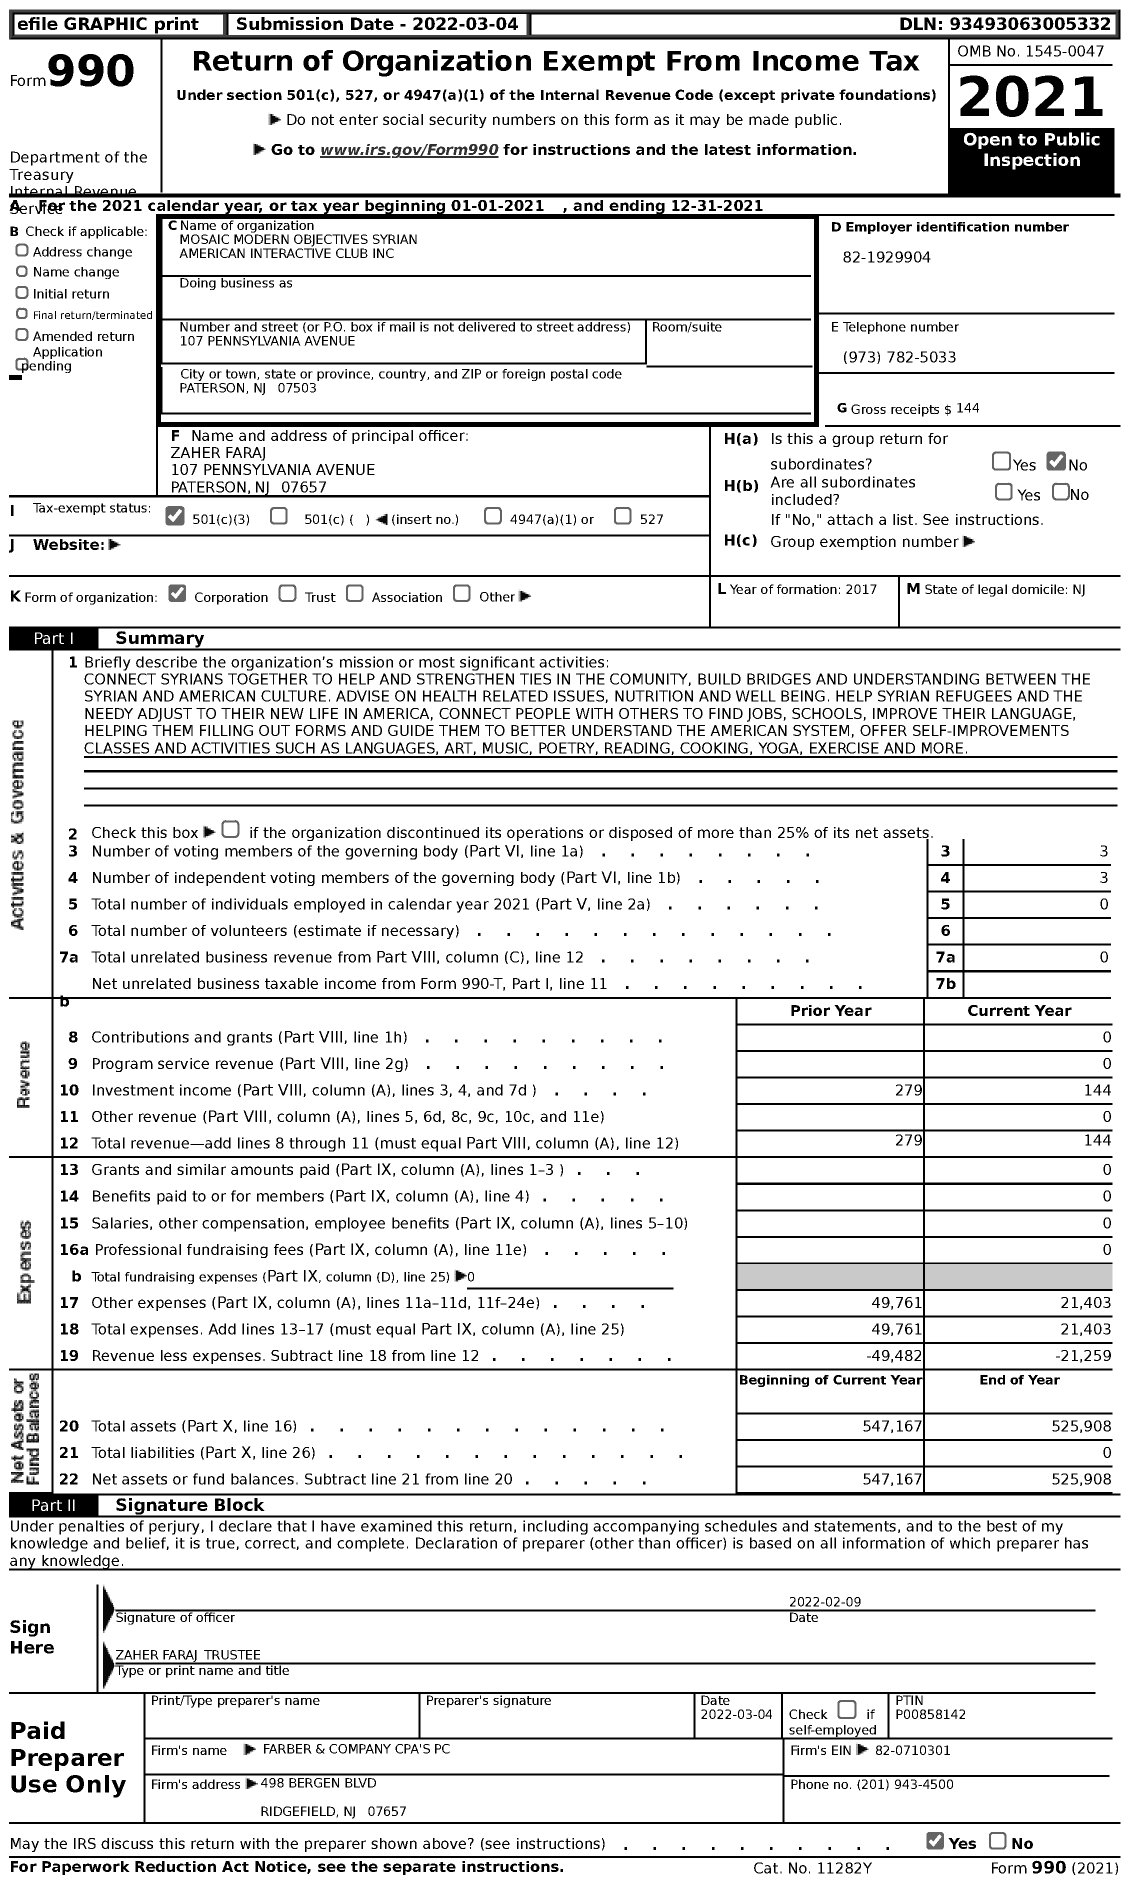 Image of first page of 2021 Form 990 for Mosaic Modern Objectives Syrain American Interactive Club